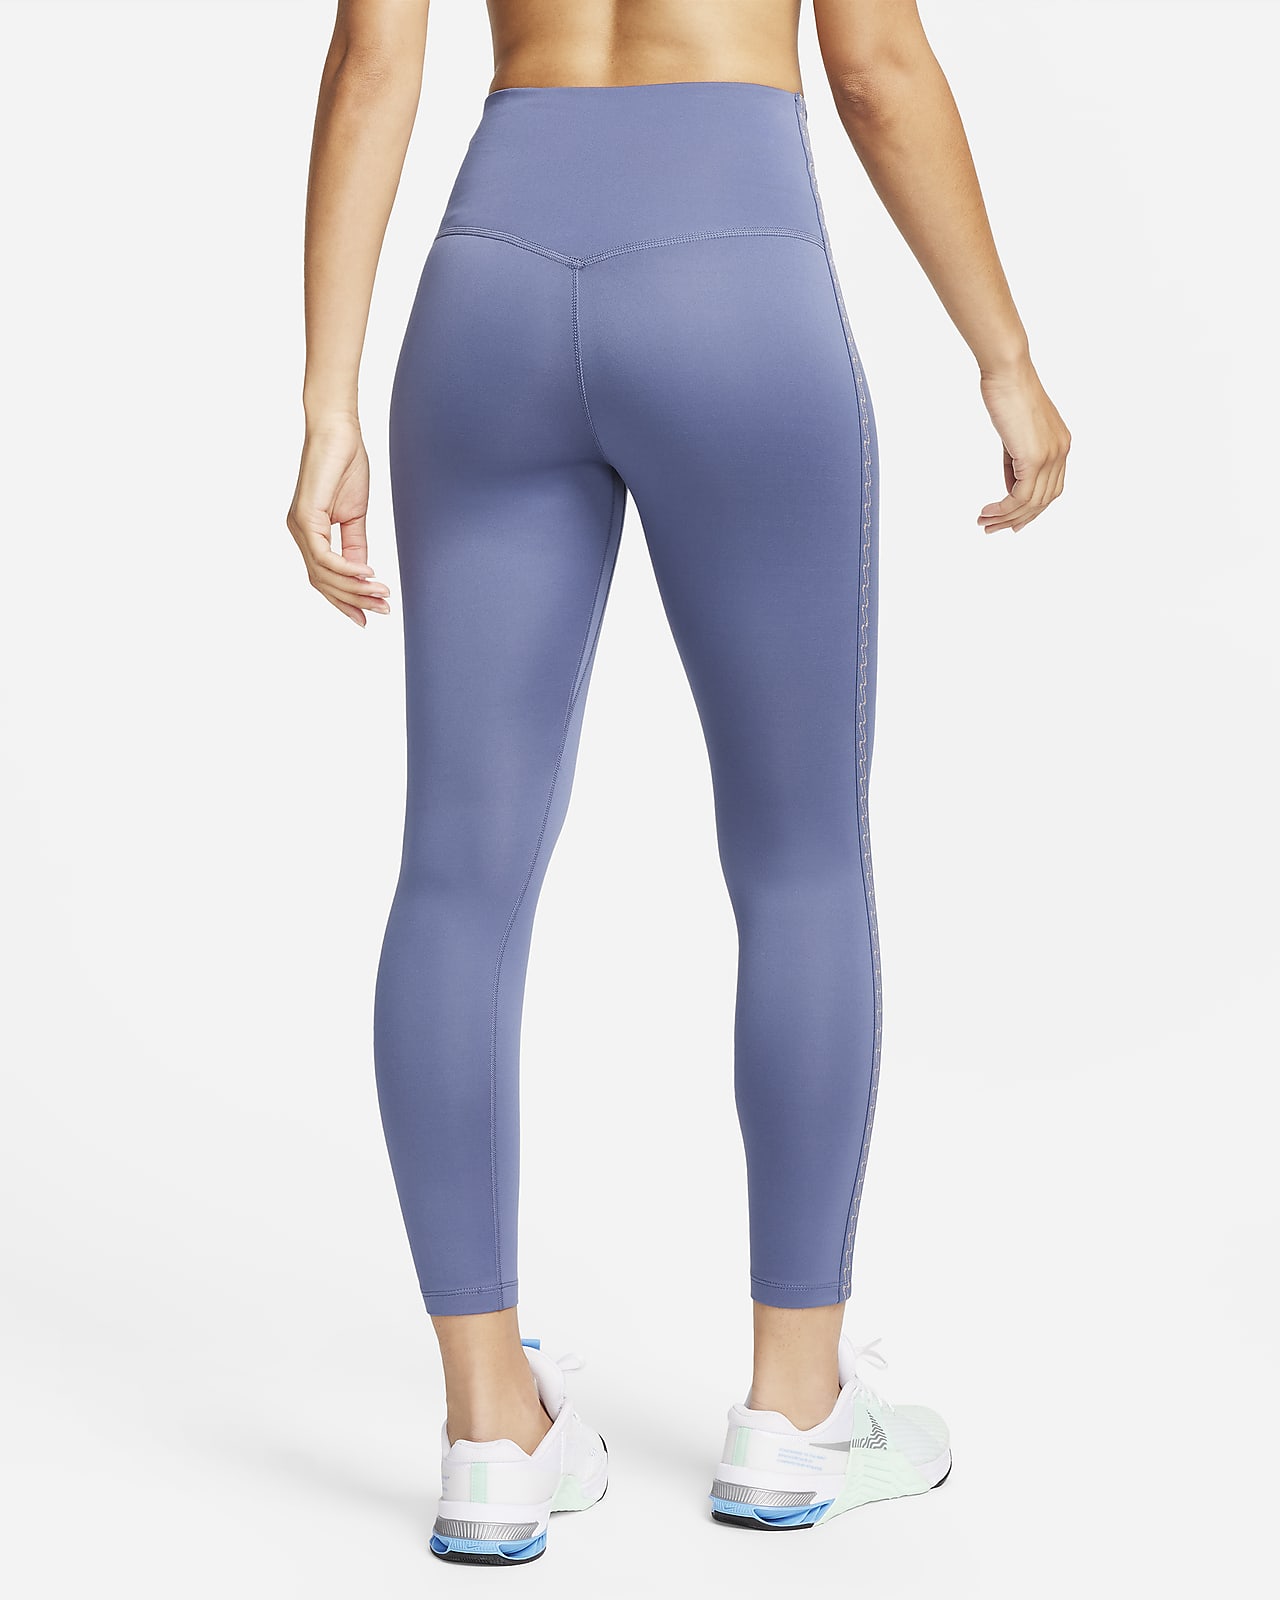 New Nike Women's High-Rise Fitness Athletic Tight FIt Leggings X